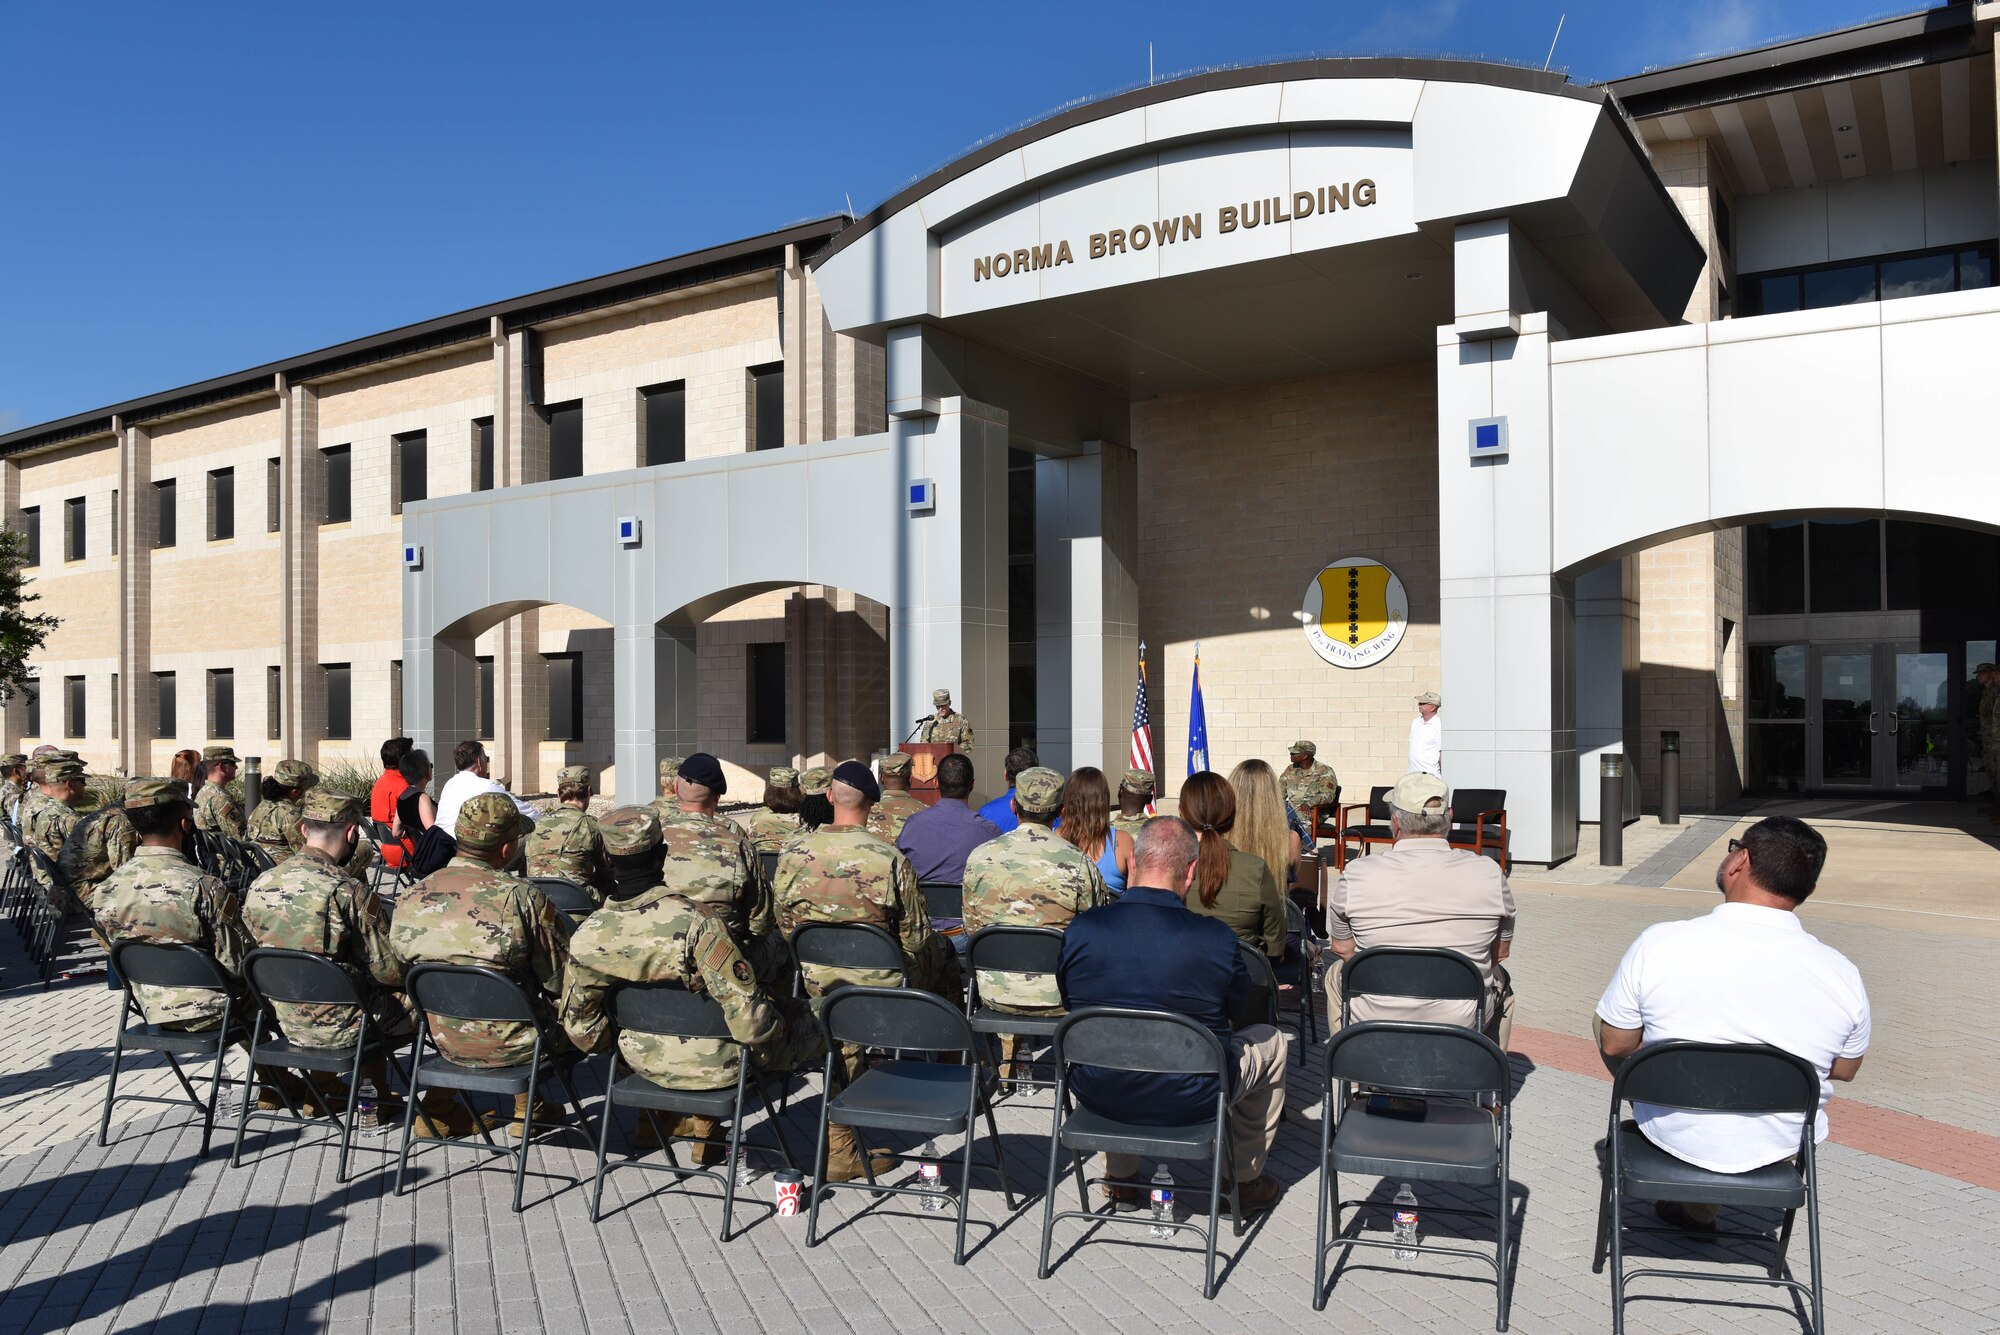 Members of the base community gather in celebration of the Goodfellow Heritage Ceremony on Goodfellow Air Force Base, Texas, July 1, 2021. Members attended the ceremony to celebrate the 80th Anniversary of Goodfellow Air Field. (U.S. Air Force photo by Senior Airman Jermaine Ayers)